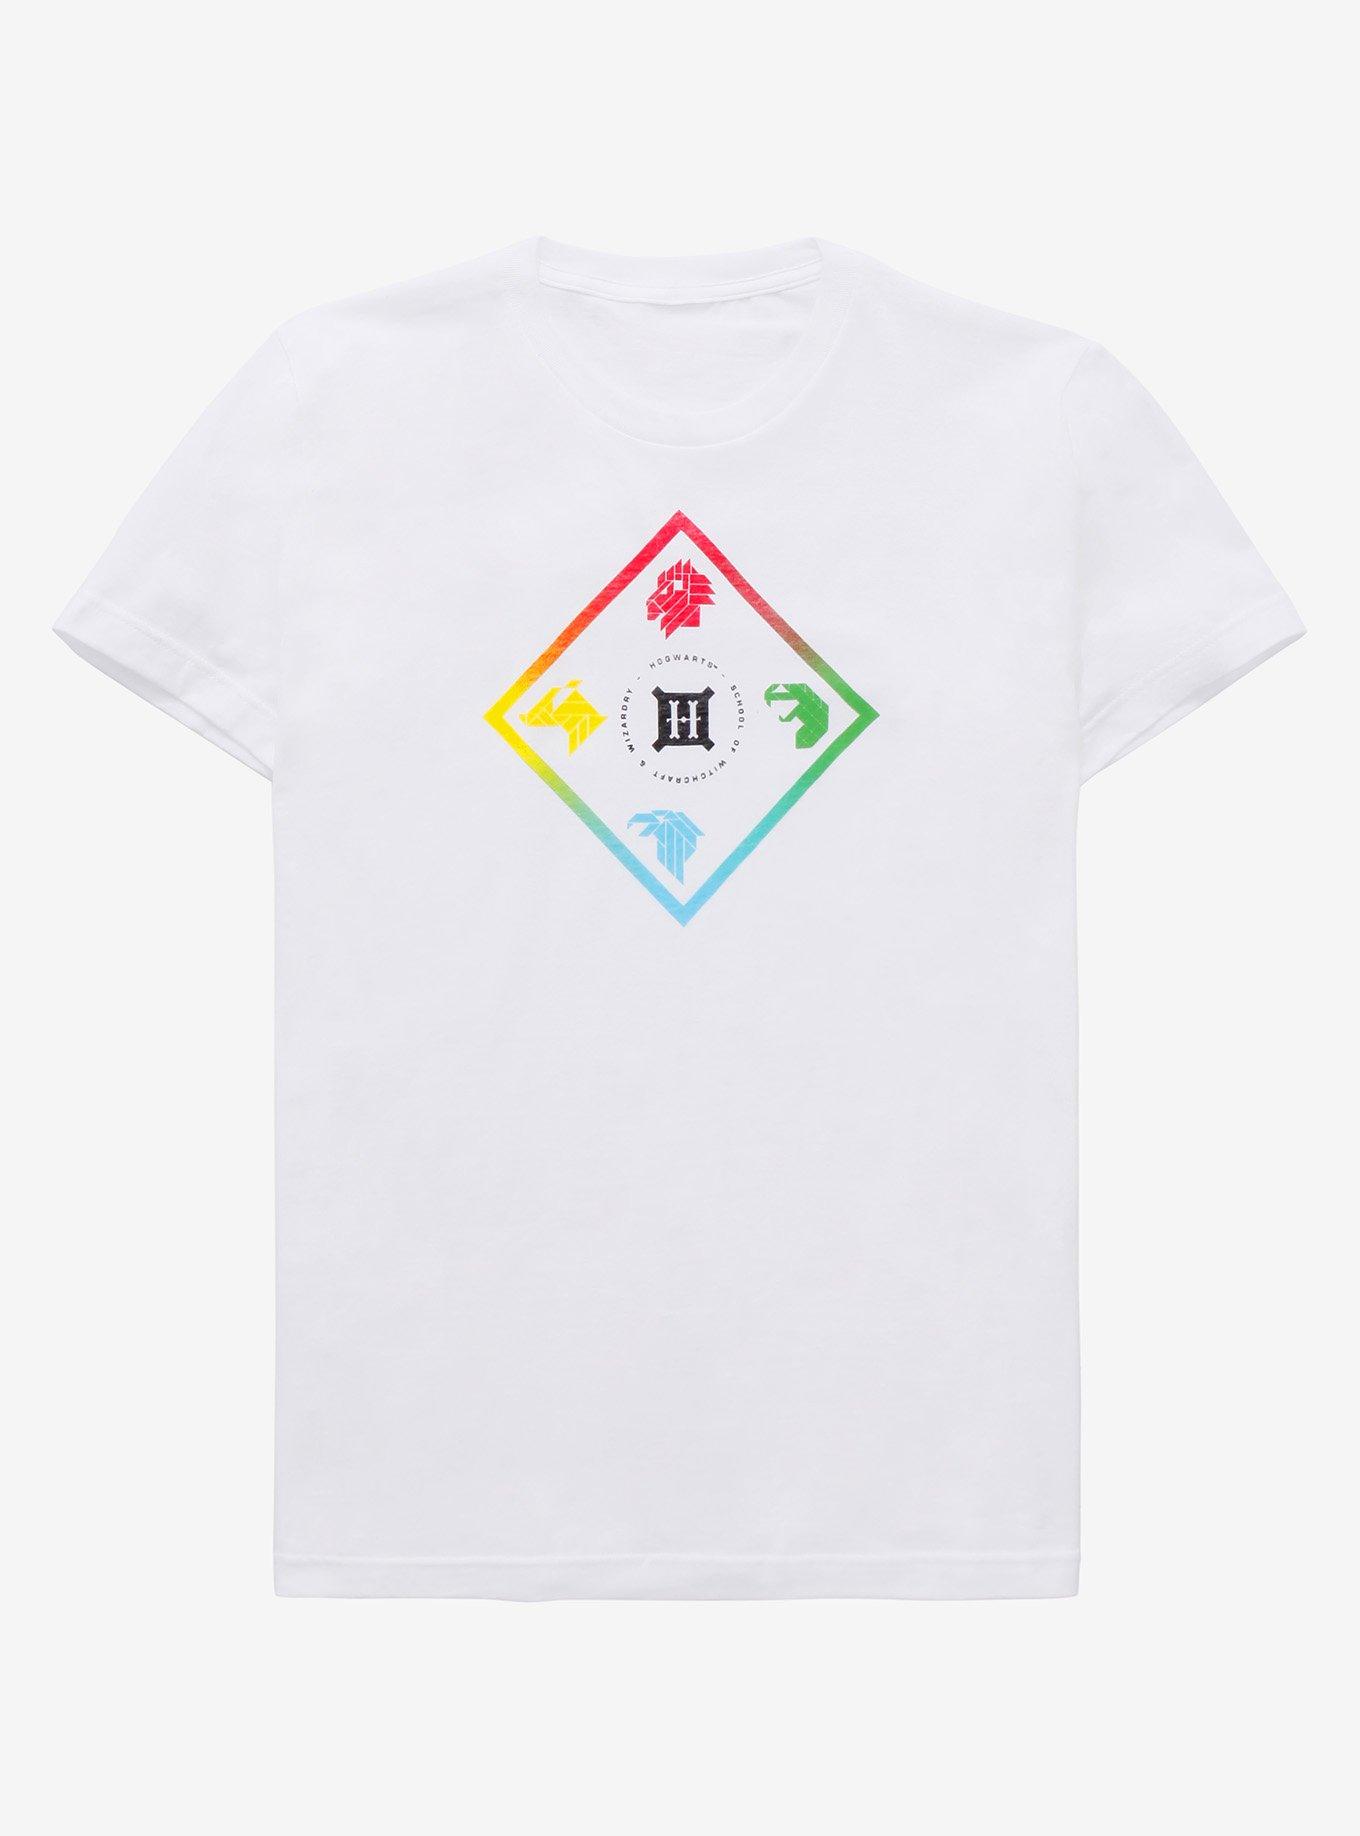 Harry Potter Geometric House Crests T-Shirt - BoxLunch Exclusive, OFF WHITE, hi-res